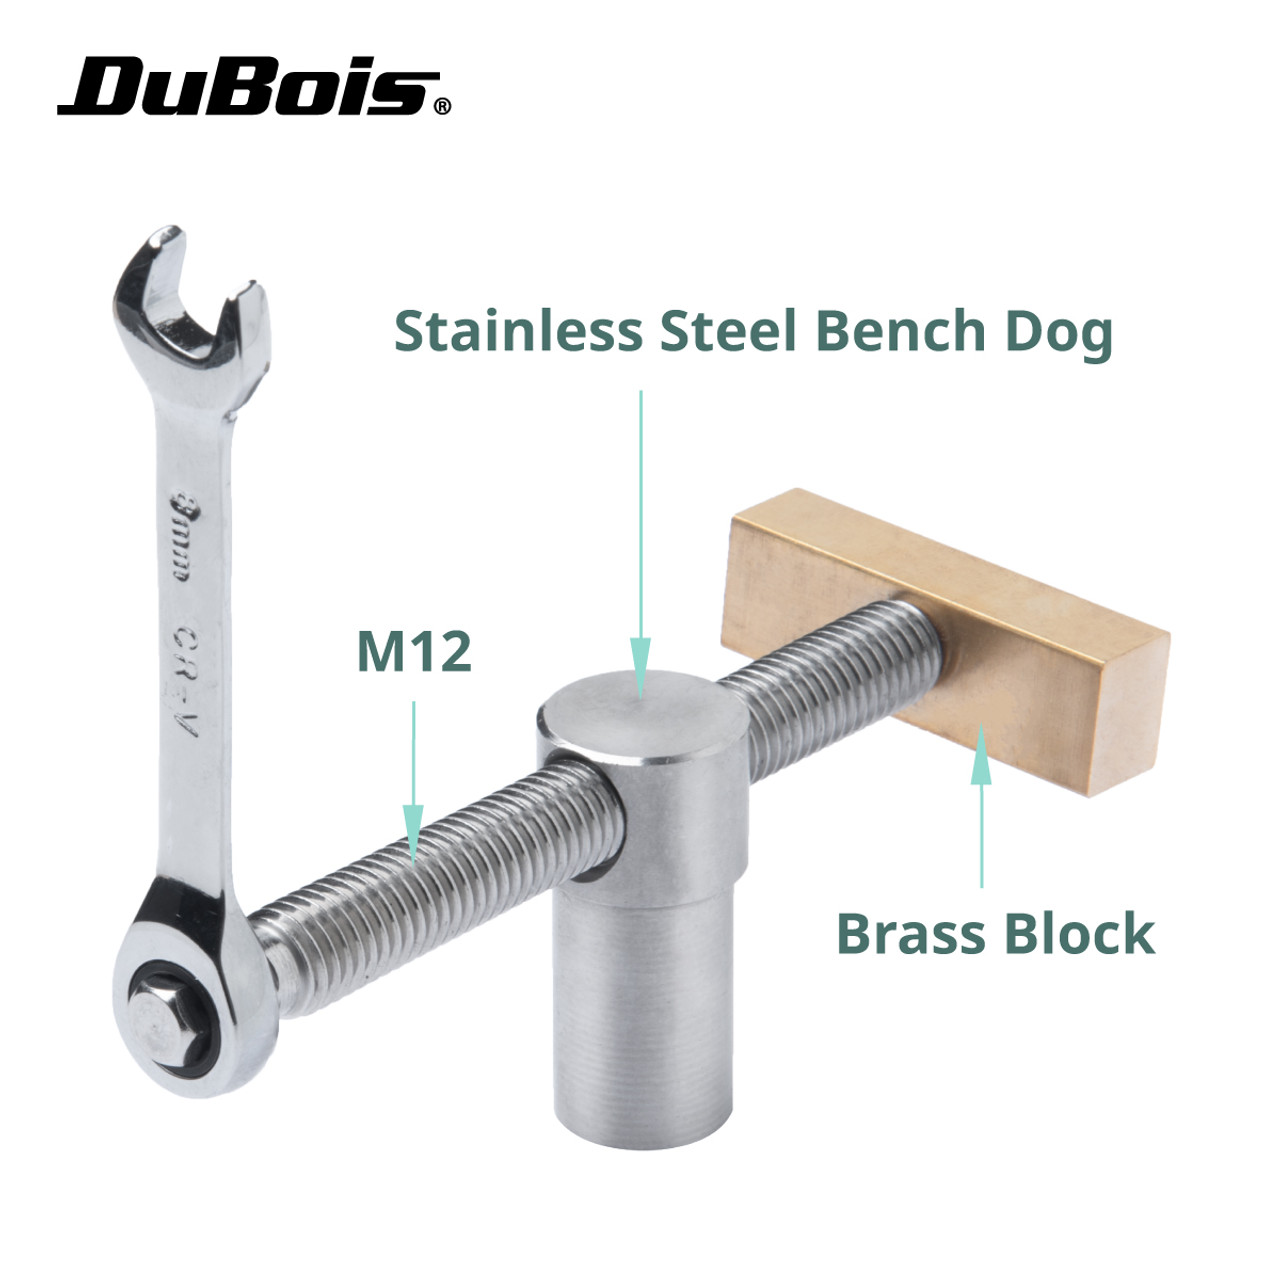 2 Pack Bench Dog Clamp Woodworking 3/4 Inch Dog Hole Clamp with 4 Pack  Bench Dogs Adjustable Workbench Stop Stainless Steel Brass Carpenter Tool